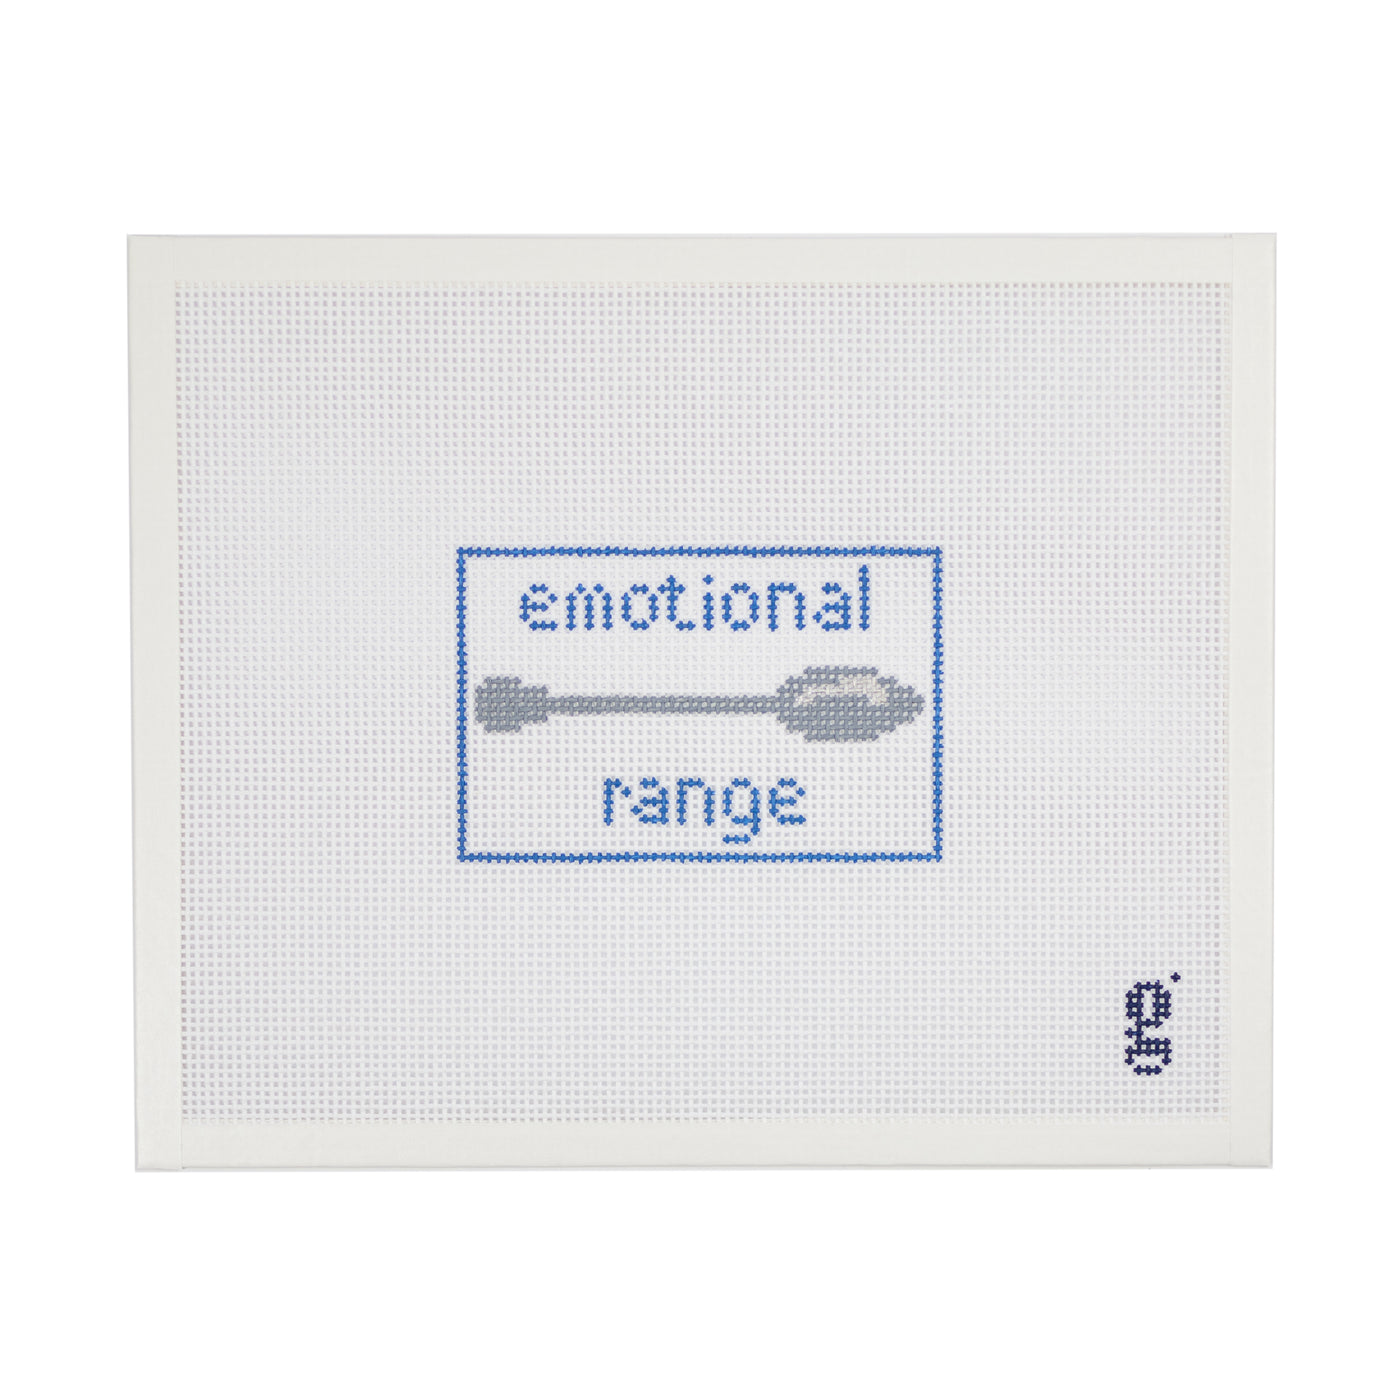 White needlepoint canvas with blue rectangle. Inside rectangle are the words "emotional range" in blue lower case block font. In between the two words is an illustration of a teaspoon.